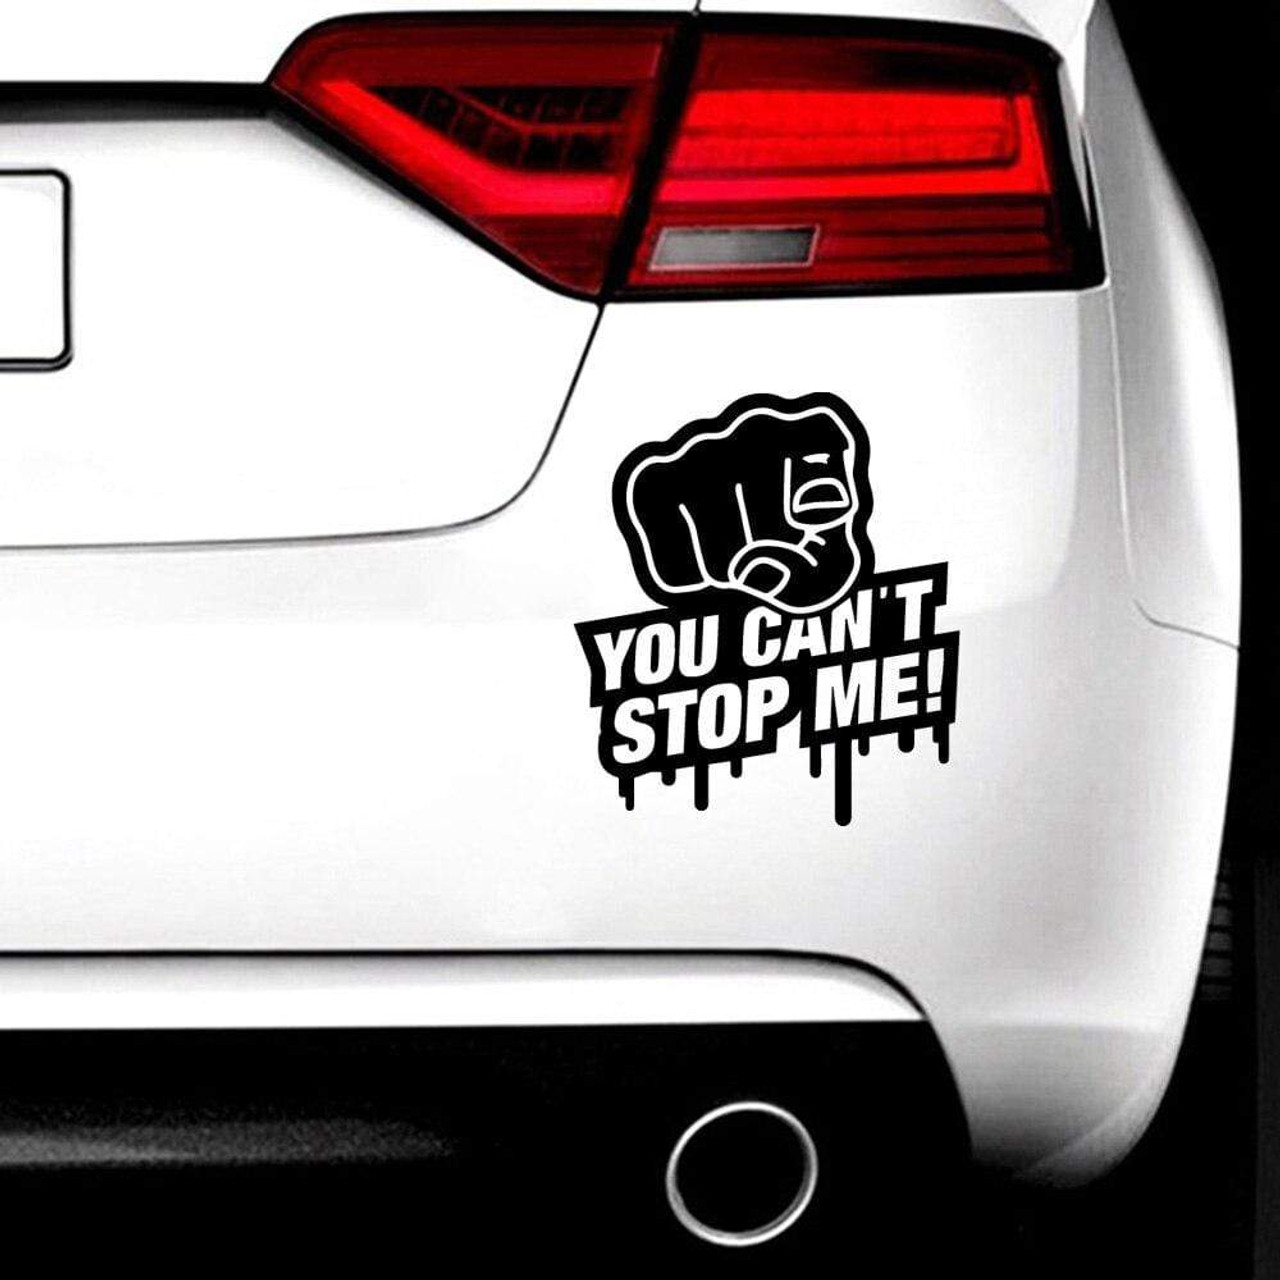 https://cdn11.bigcommerce.com/s-ktdamhfv2f/images/stencil/1280x1280/products/5536/21382/shop910340221-store-car-stickers-you-can-t-stop-me-auto-sticker-28406026272948__84767.1673555424.jpg?c=1